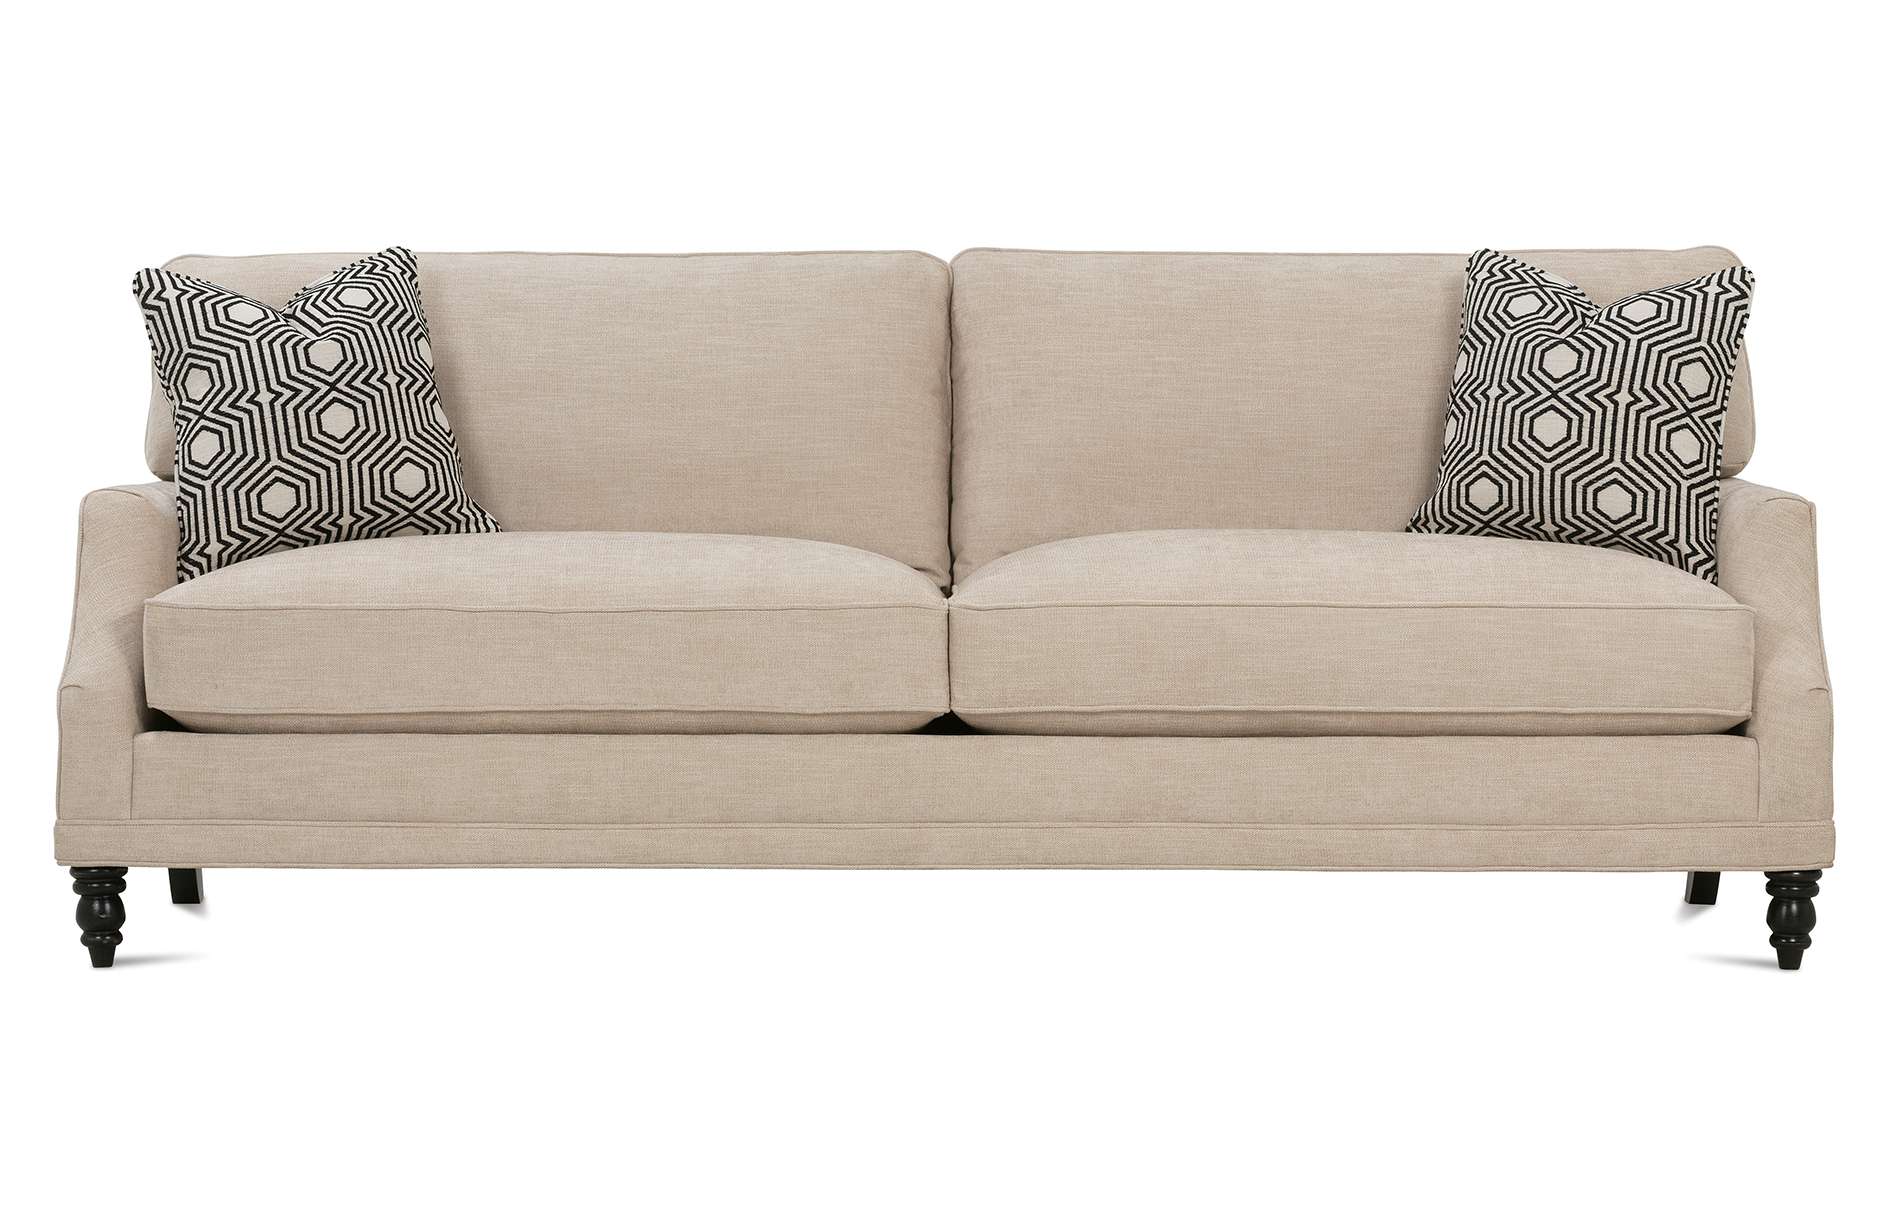 a beige couch with two pillows on it on a white background .